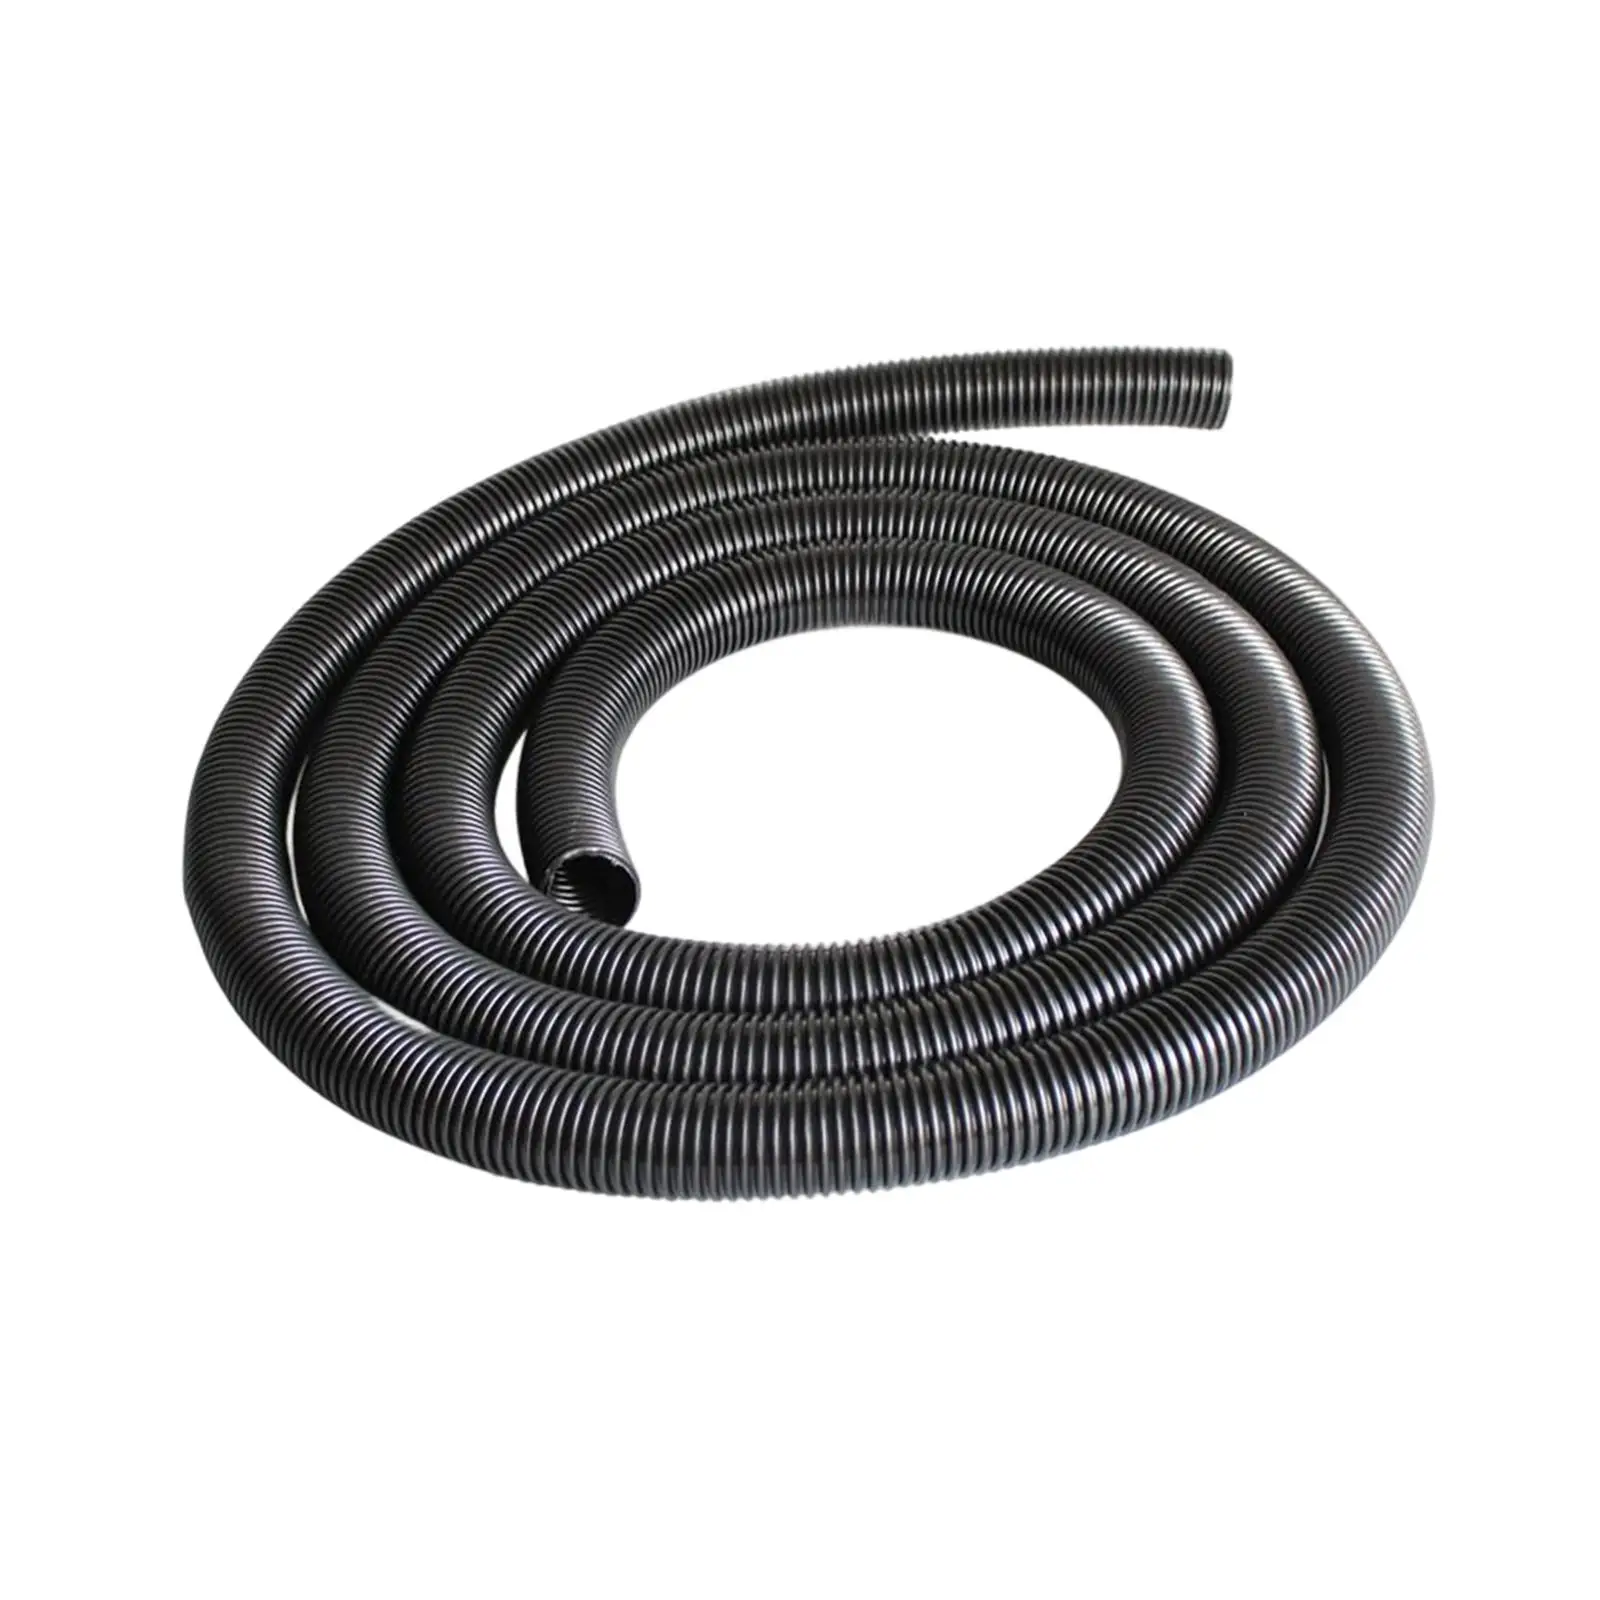 Replacement Vacuums Hose Accs 200cm Durable Fittings Universal for Cleaning Supplies